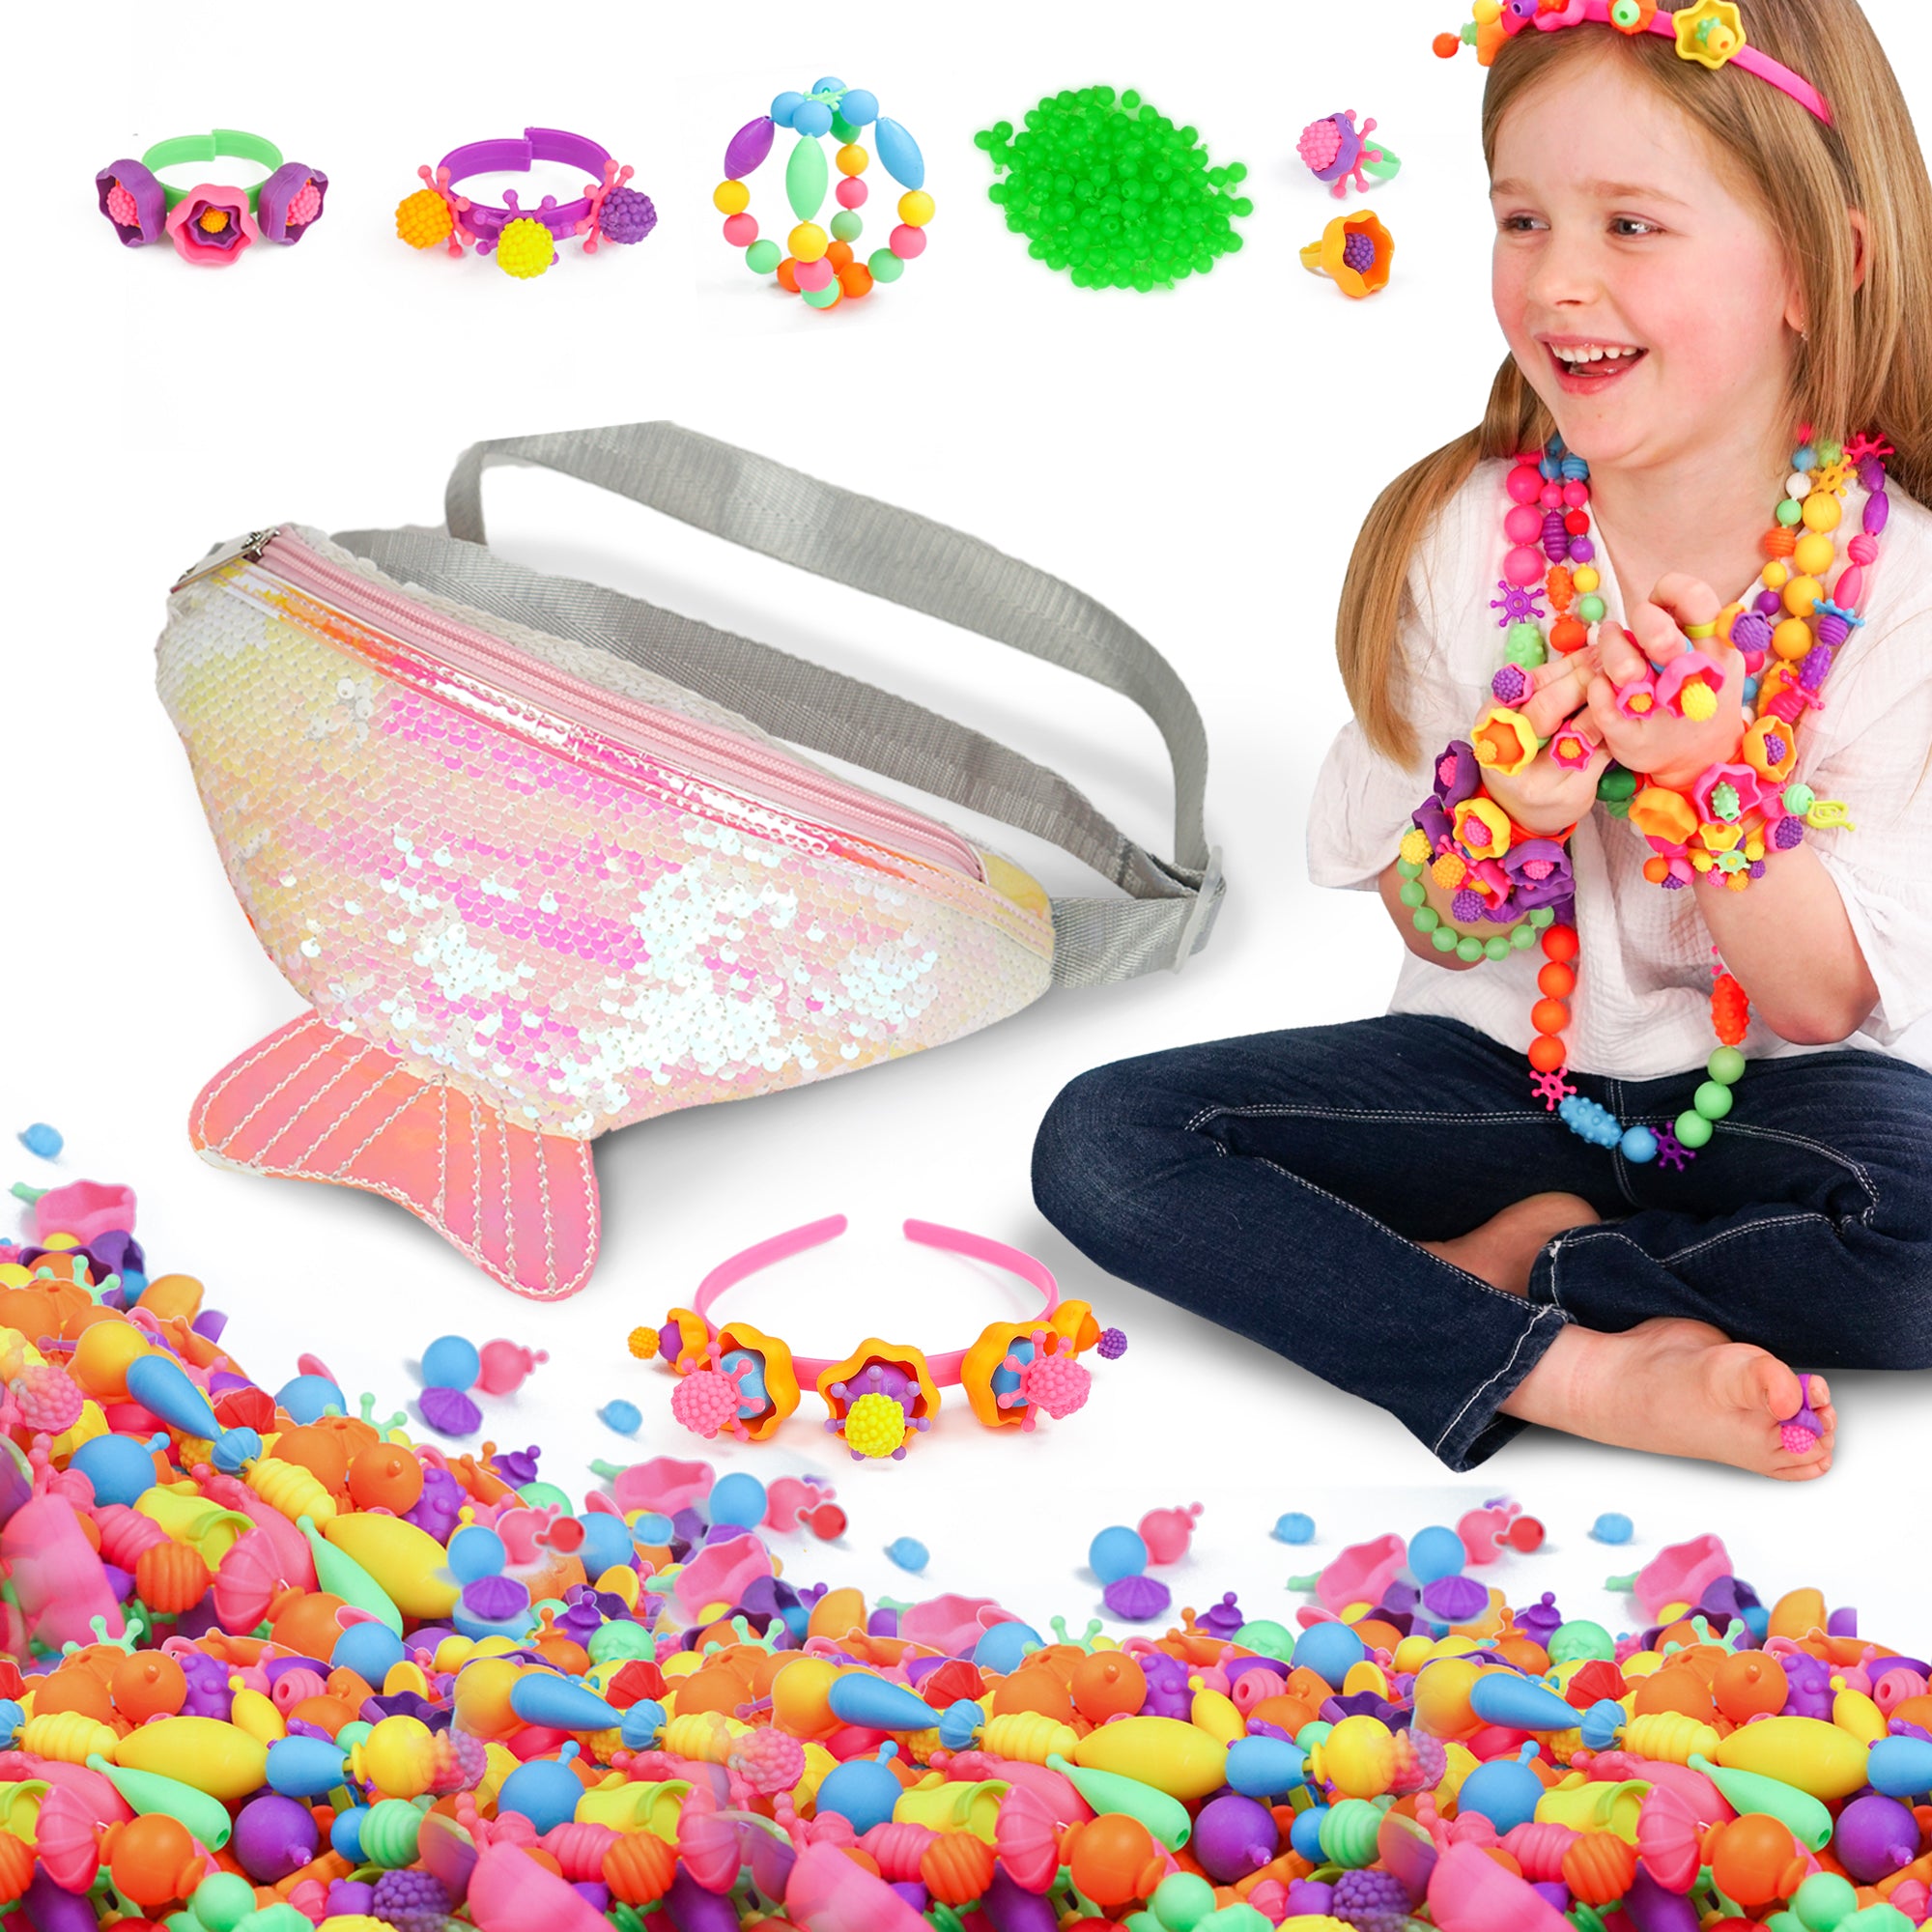 Snap Pop Beads for Girls Toys - Kids Jewelry Making Kit Pop-Bead Art and  Craft Kits - Beading & Jewelry Making Kits, Facebook Marketplace